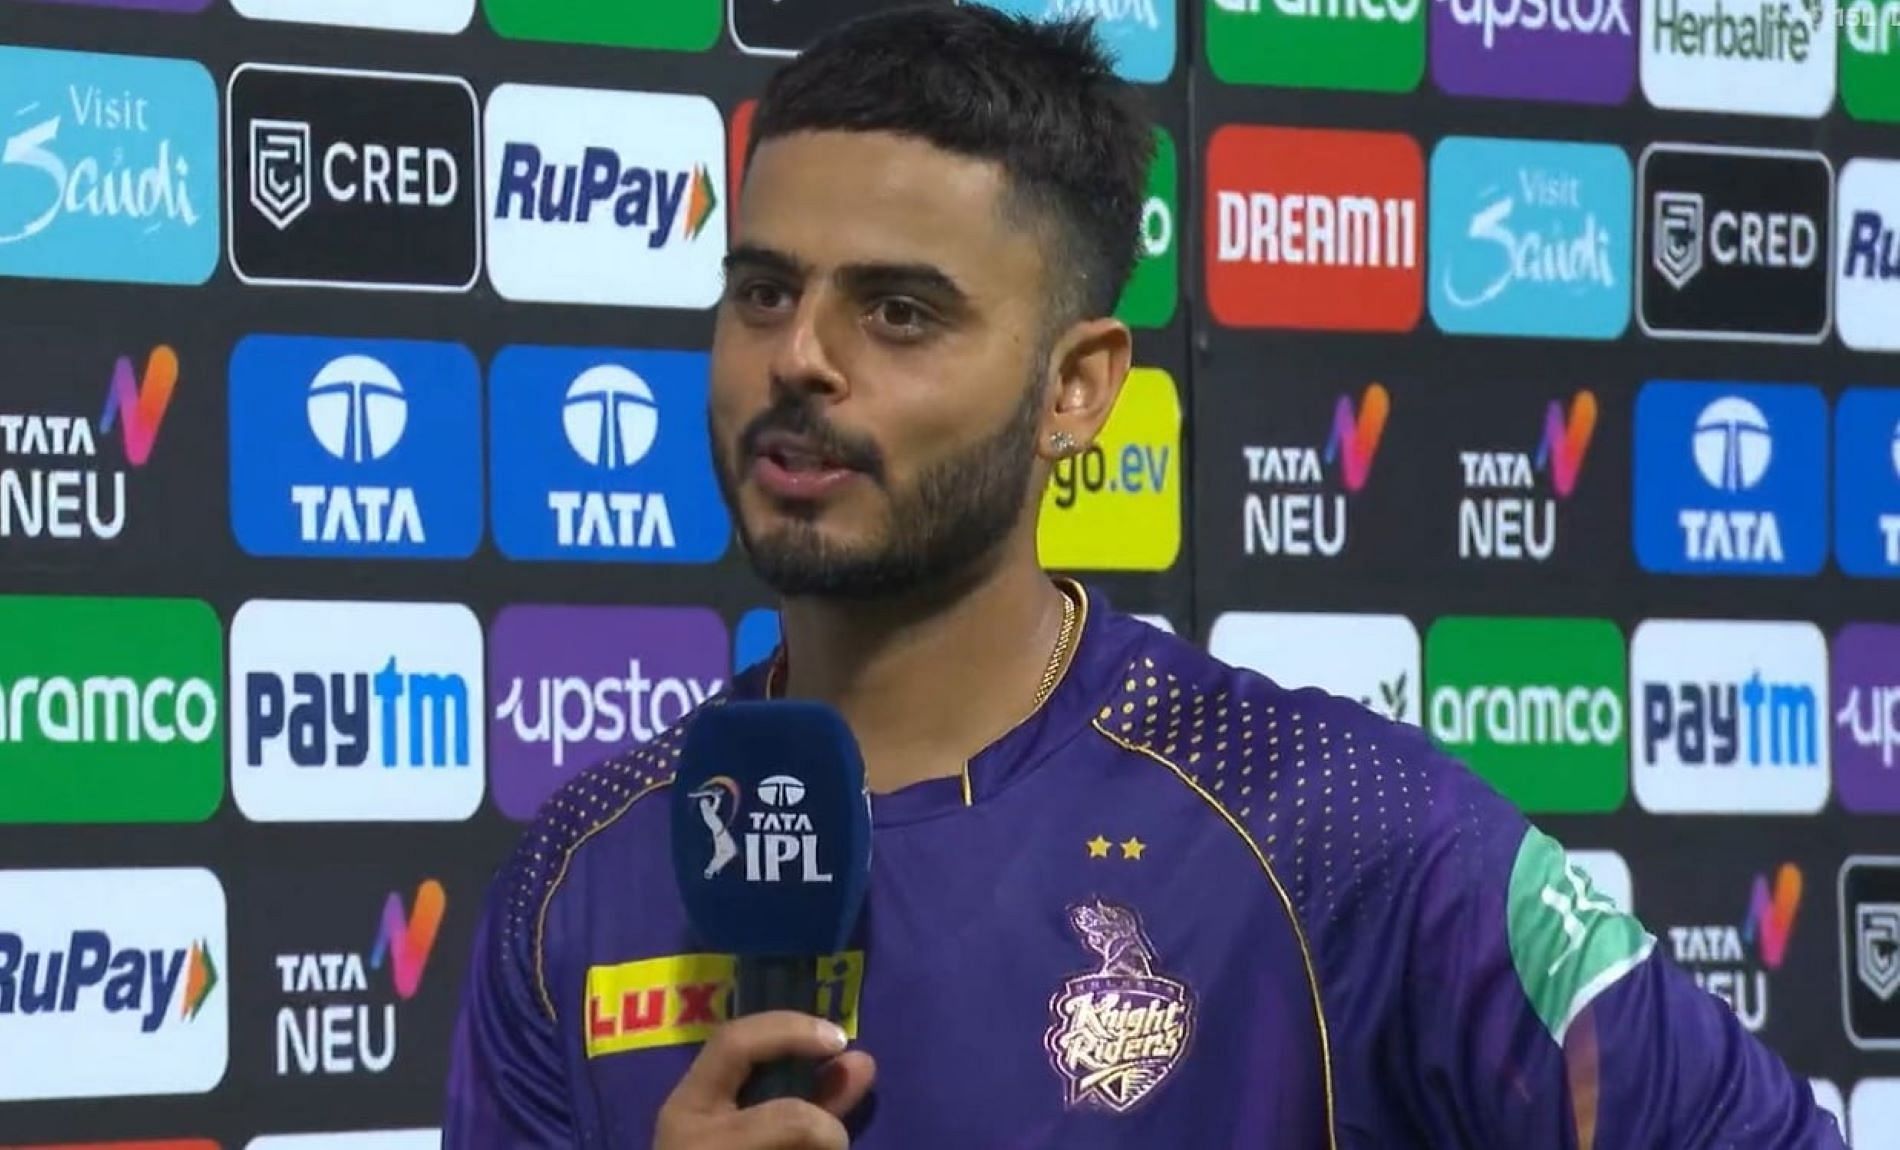 KKR skipper Nitish Rana was left disappointed after a crucial defeat to the Gujarat Titans